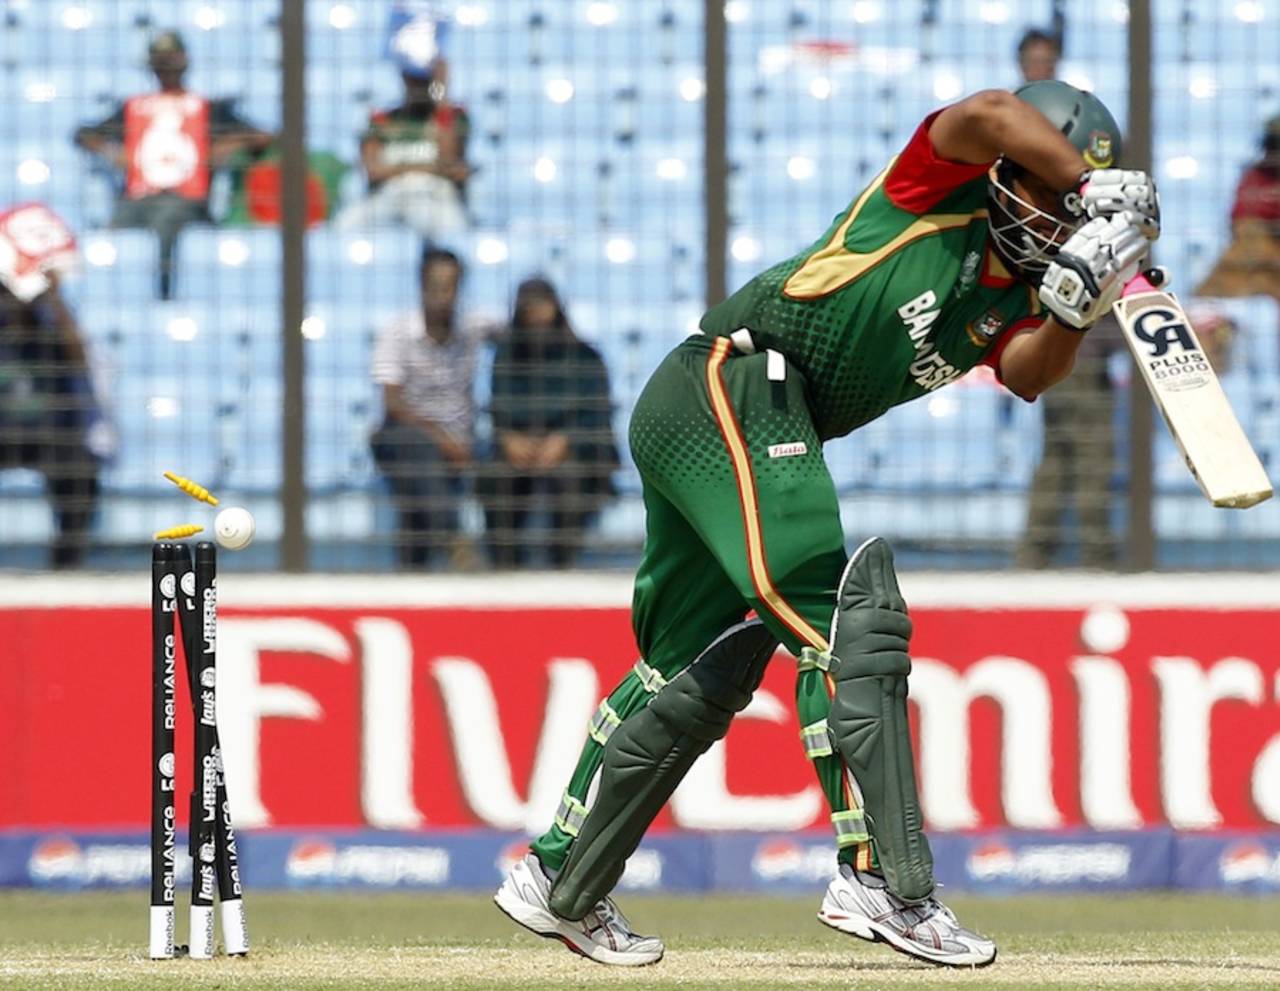 Tamim Iqbal is bowled for a duck, Bangladesh v Netherlands, Group B, World Cup 2011, Chittagong, March 14, 2011